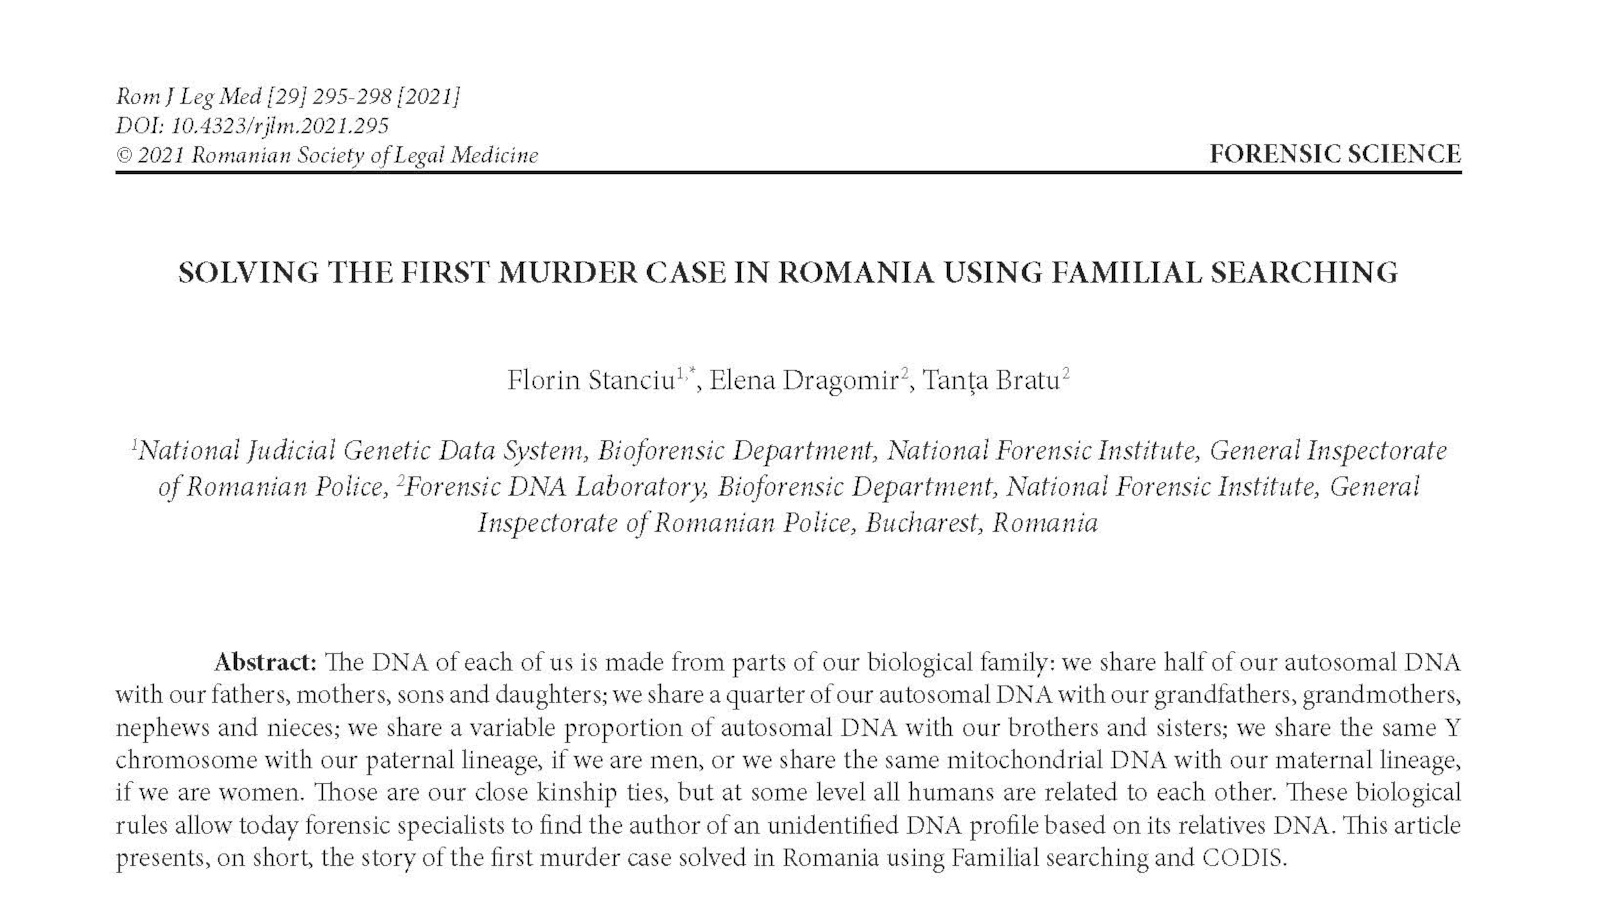 2021-solving-the-first-murder-case-in-romania-using-familial-searching